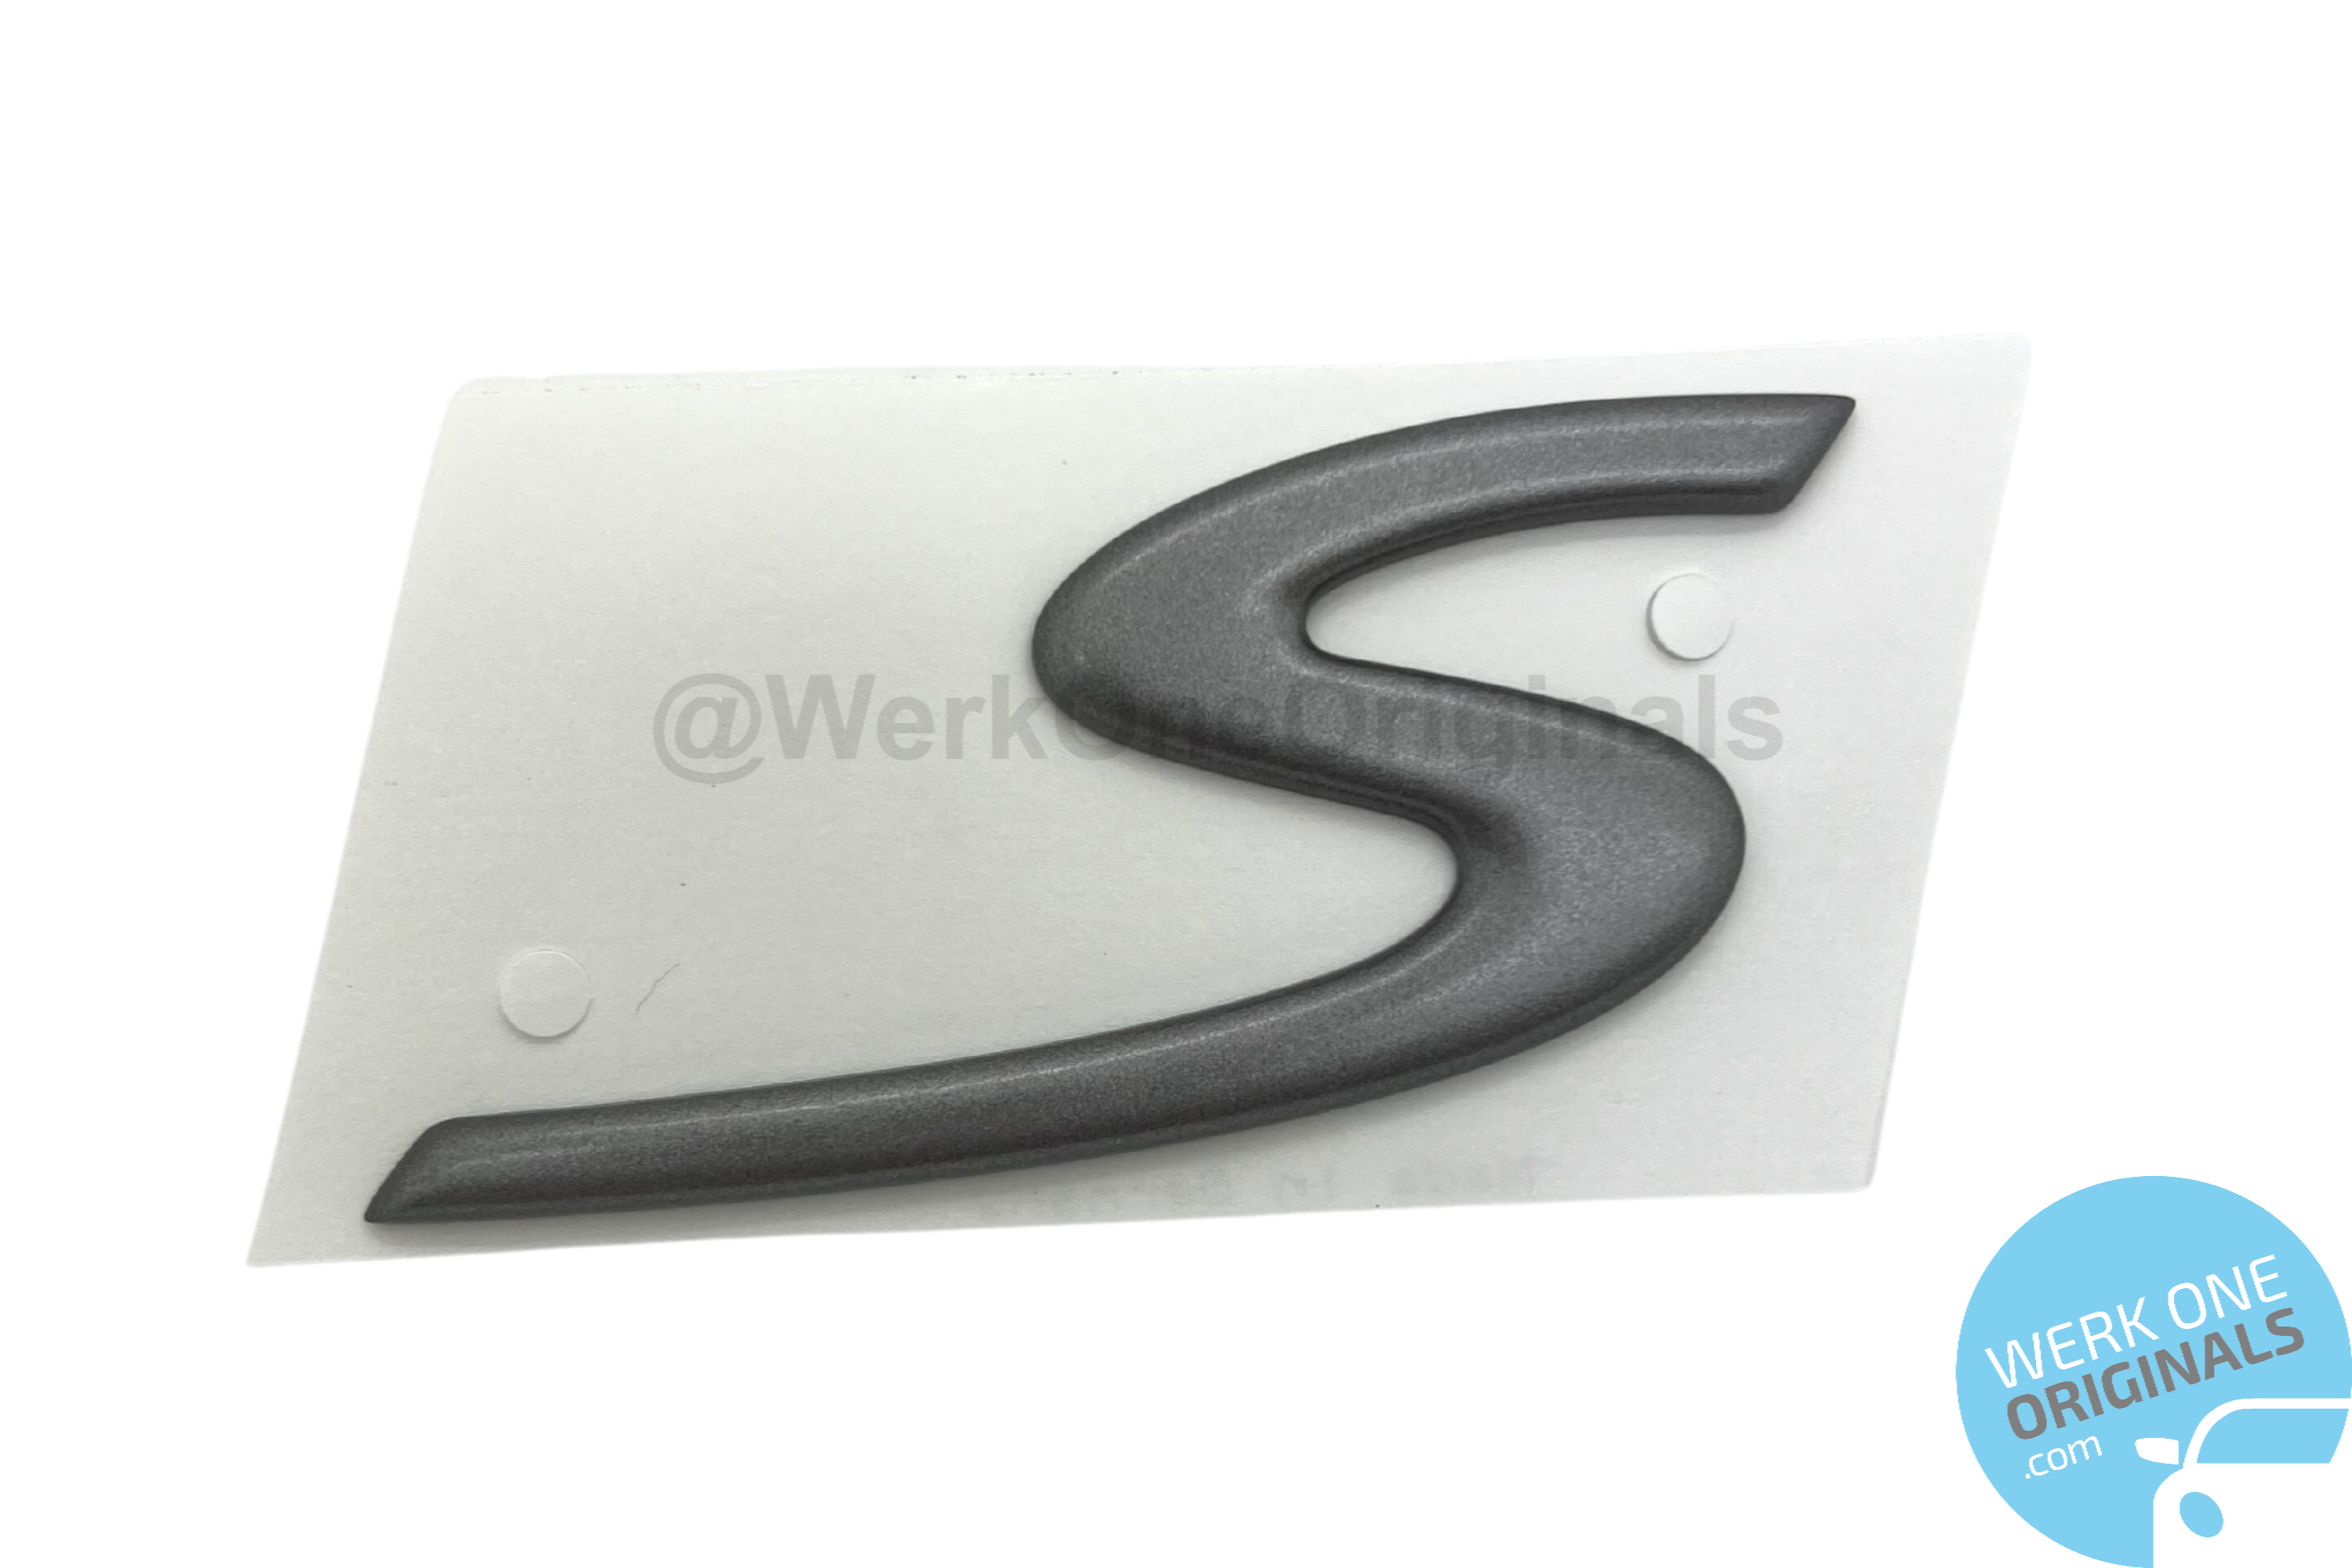 Porsche Official 'S' Rear Badge Decal in Titanium Grey for Boxster S Type 987 Models